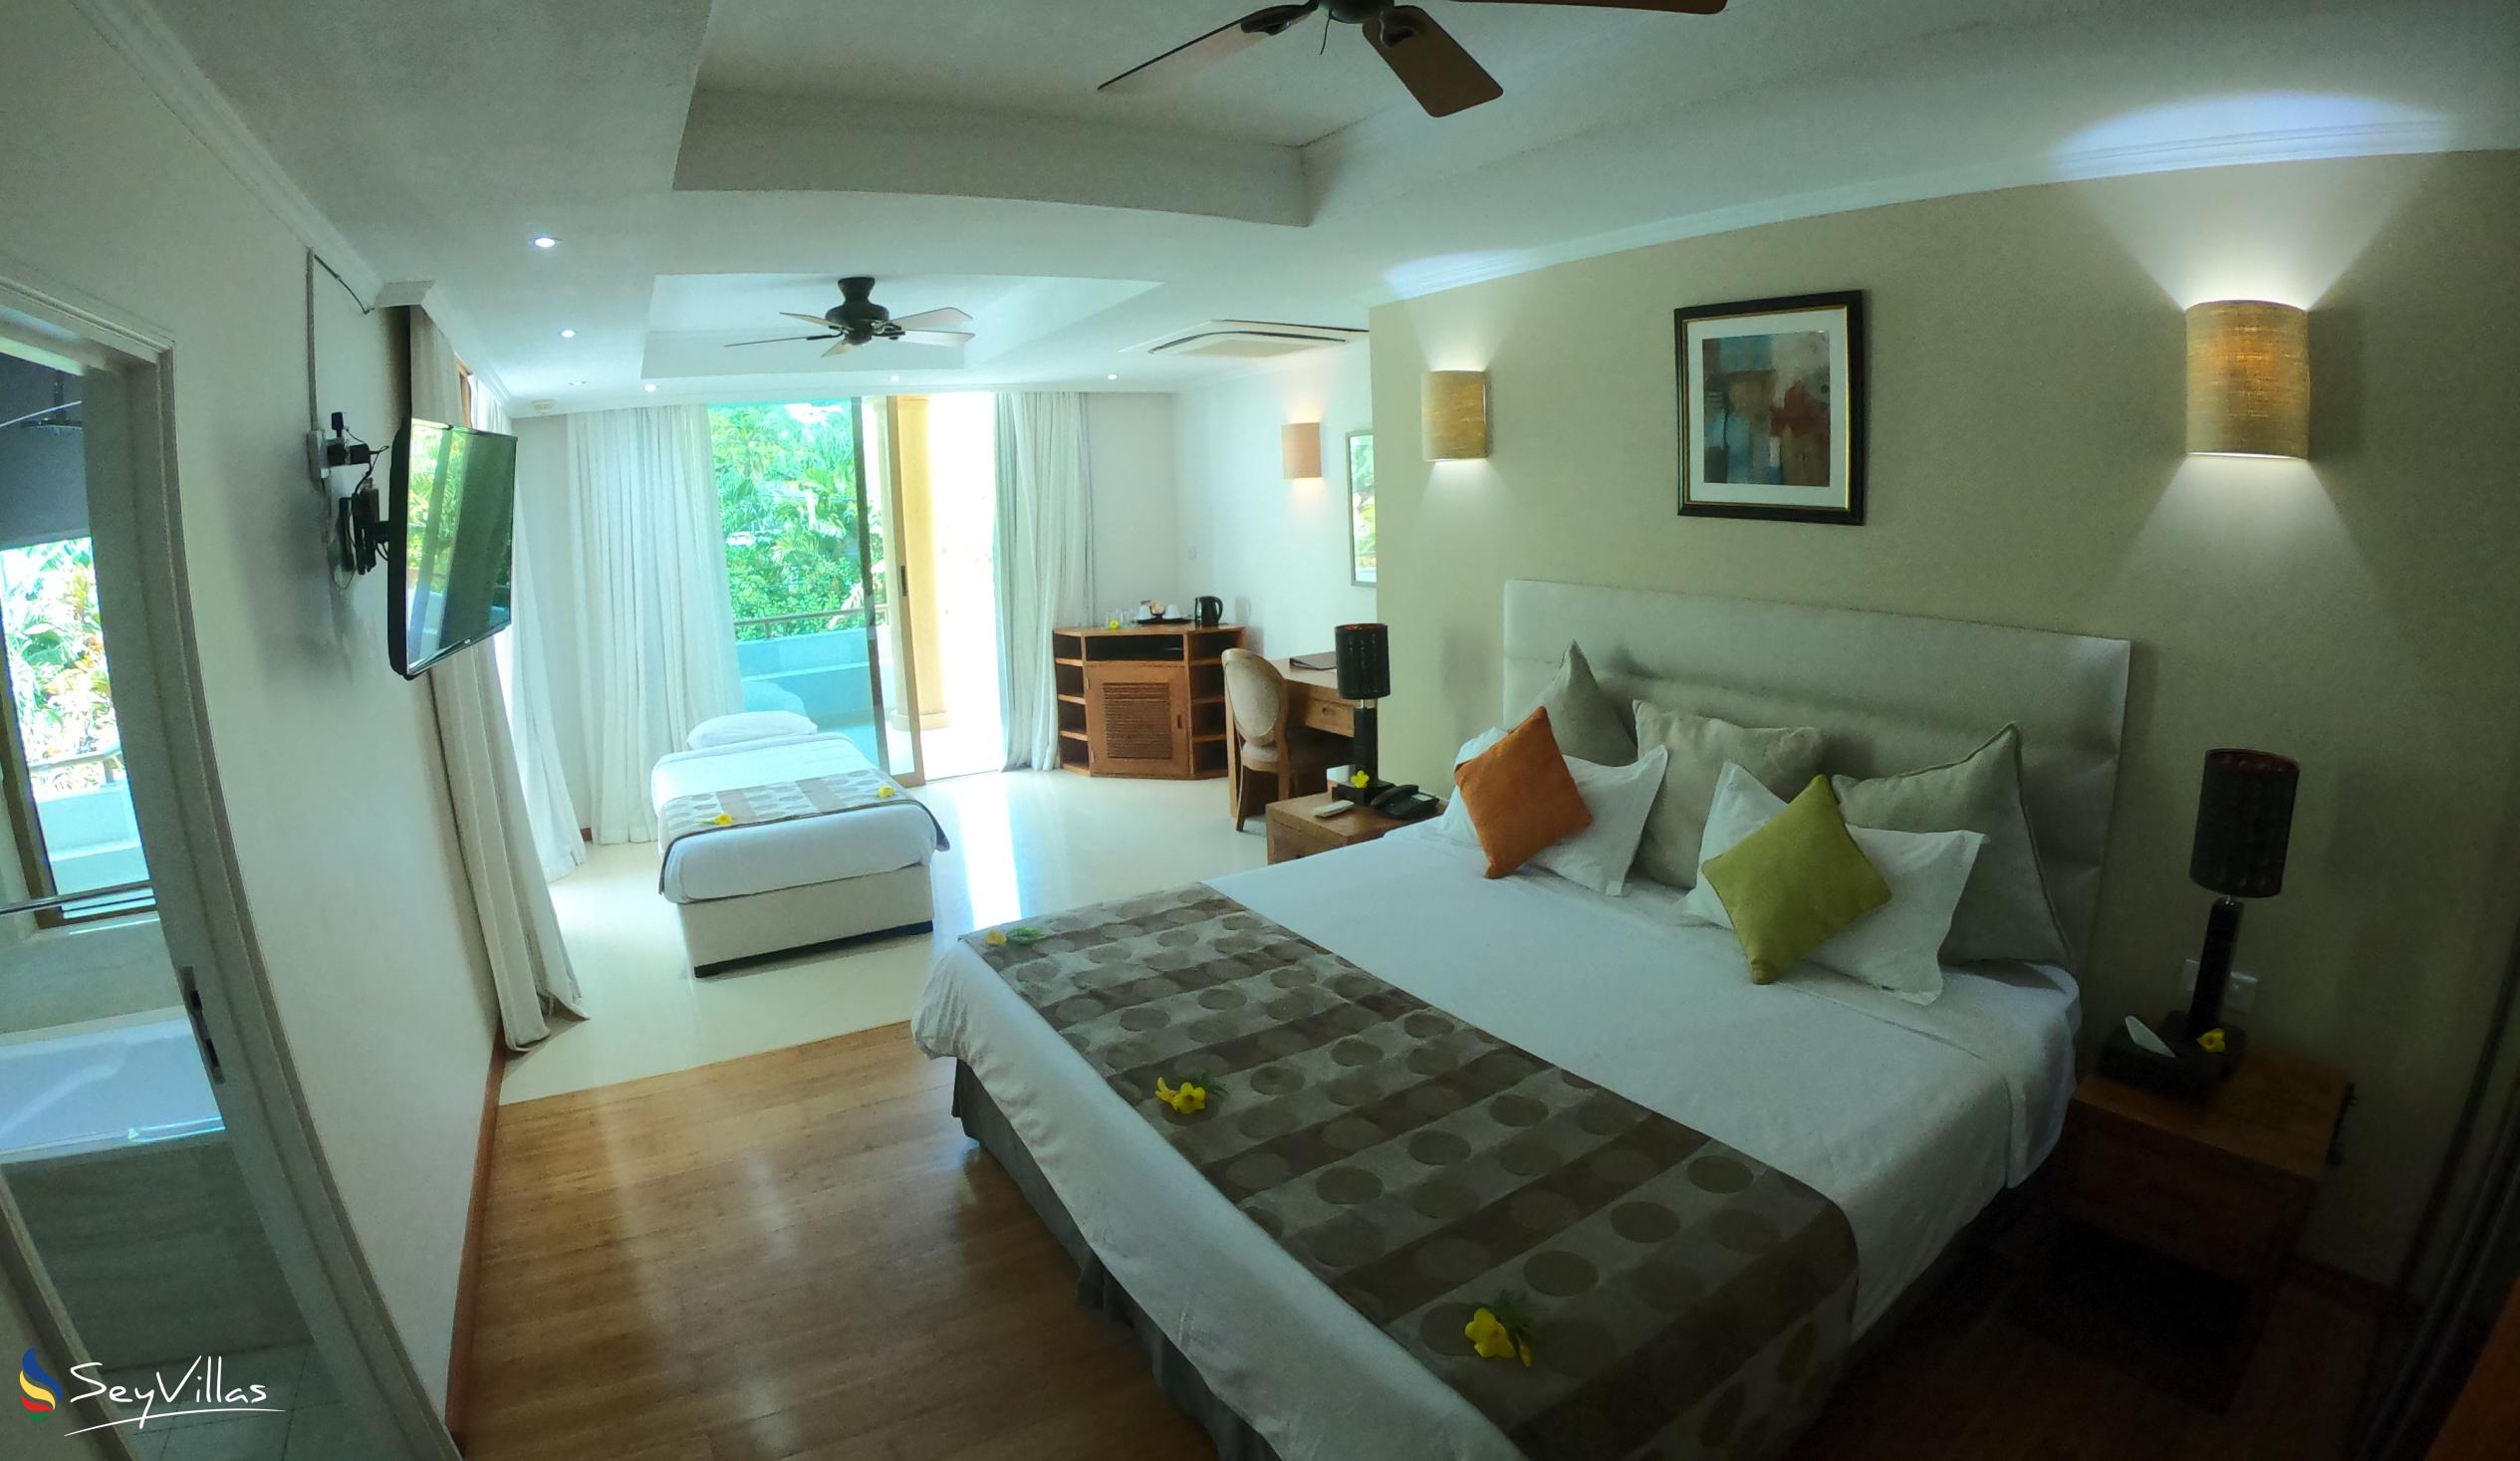 Photo 85: Crown Beach Hotel - Family Room with Mountain View - Mahé (Seychelles)